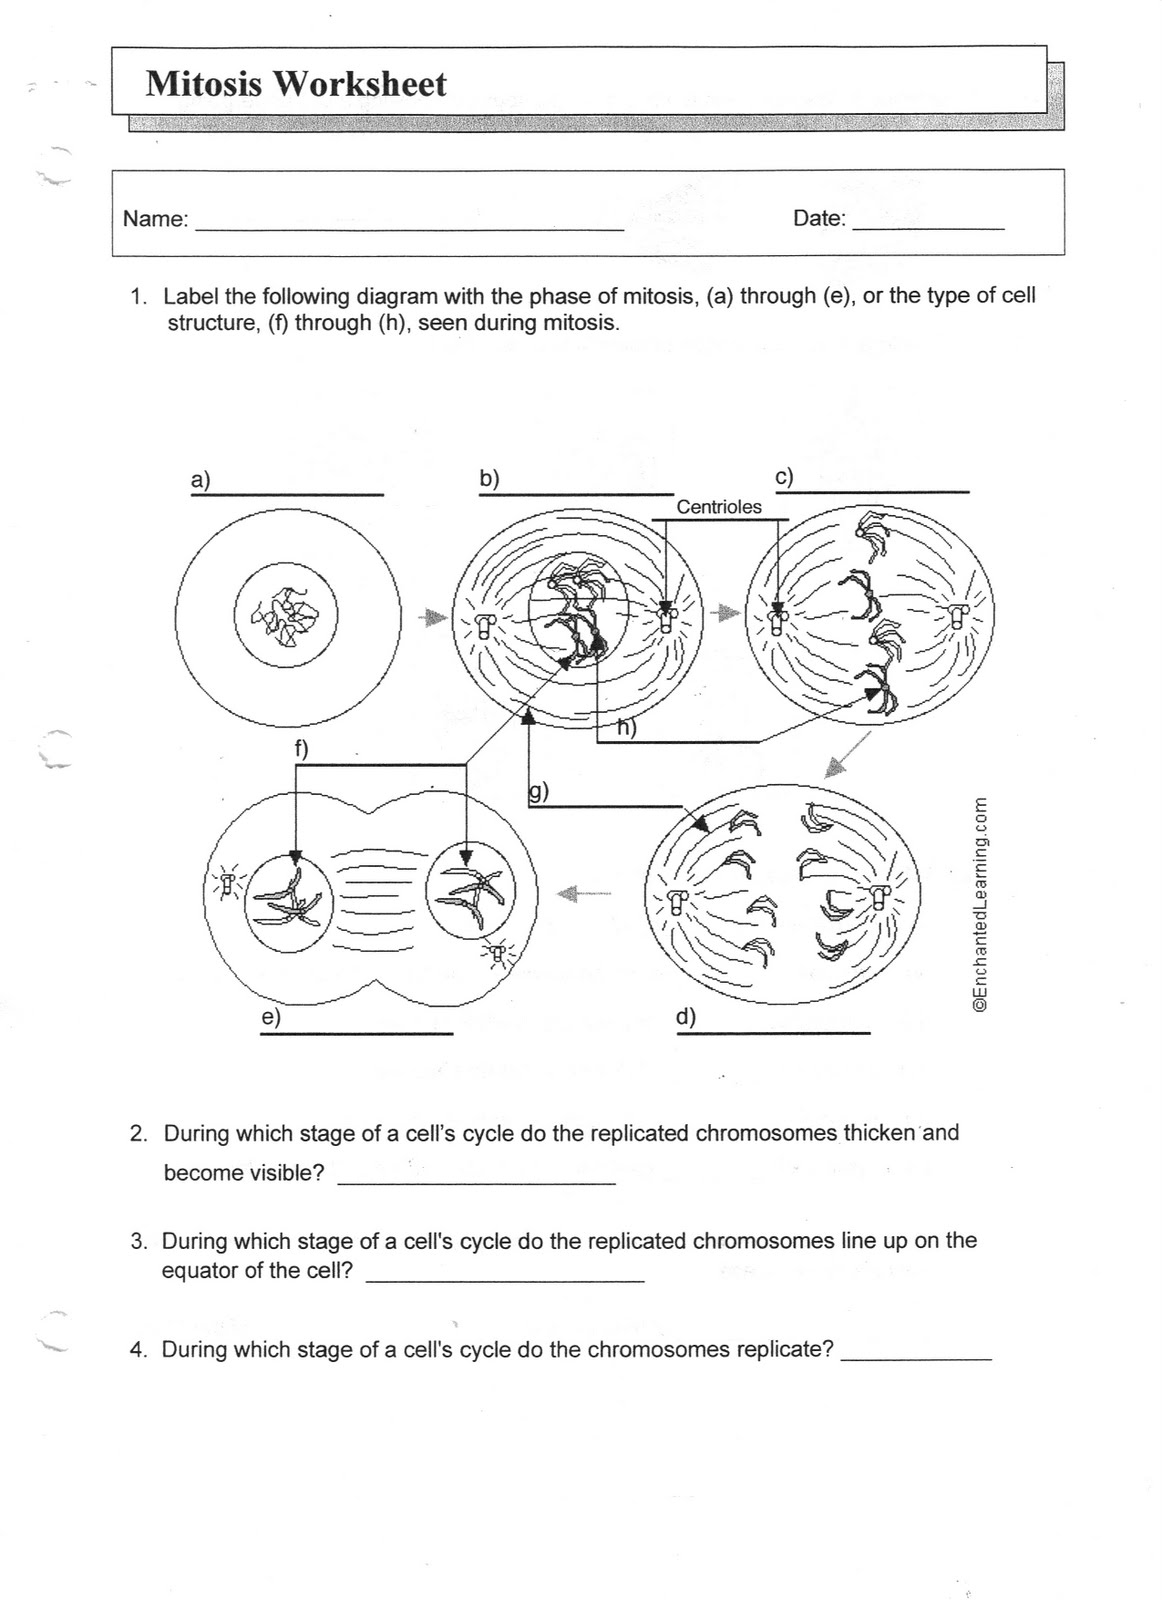 Mitosis Worksheet Answers With Regard To Meiosis Worksheet Vocabulary Answers